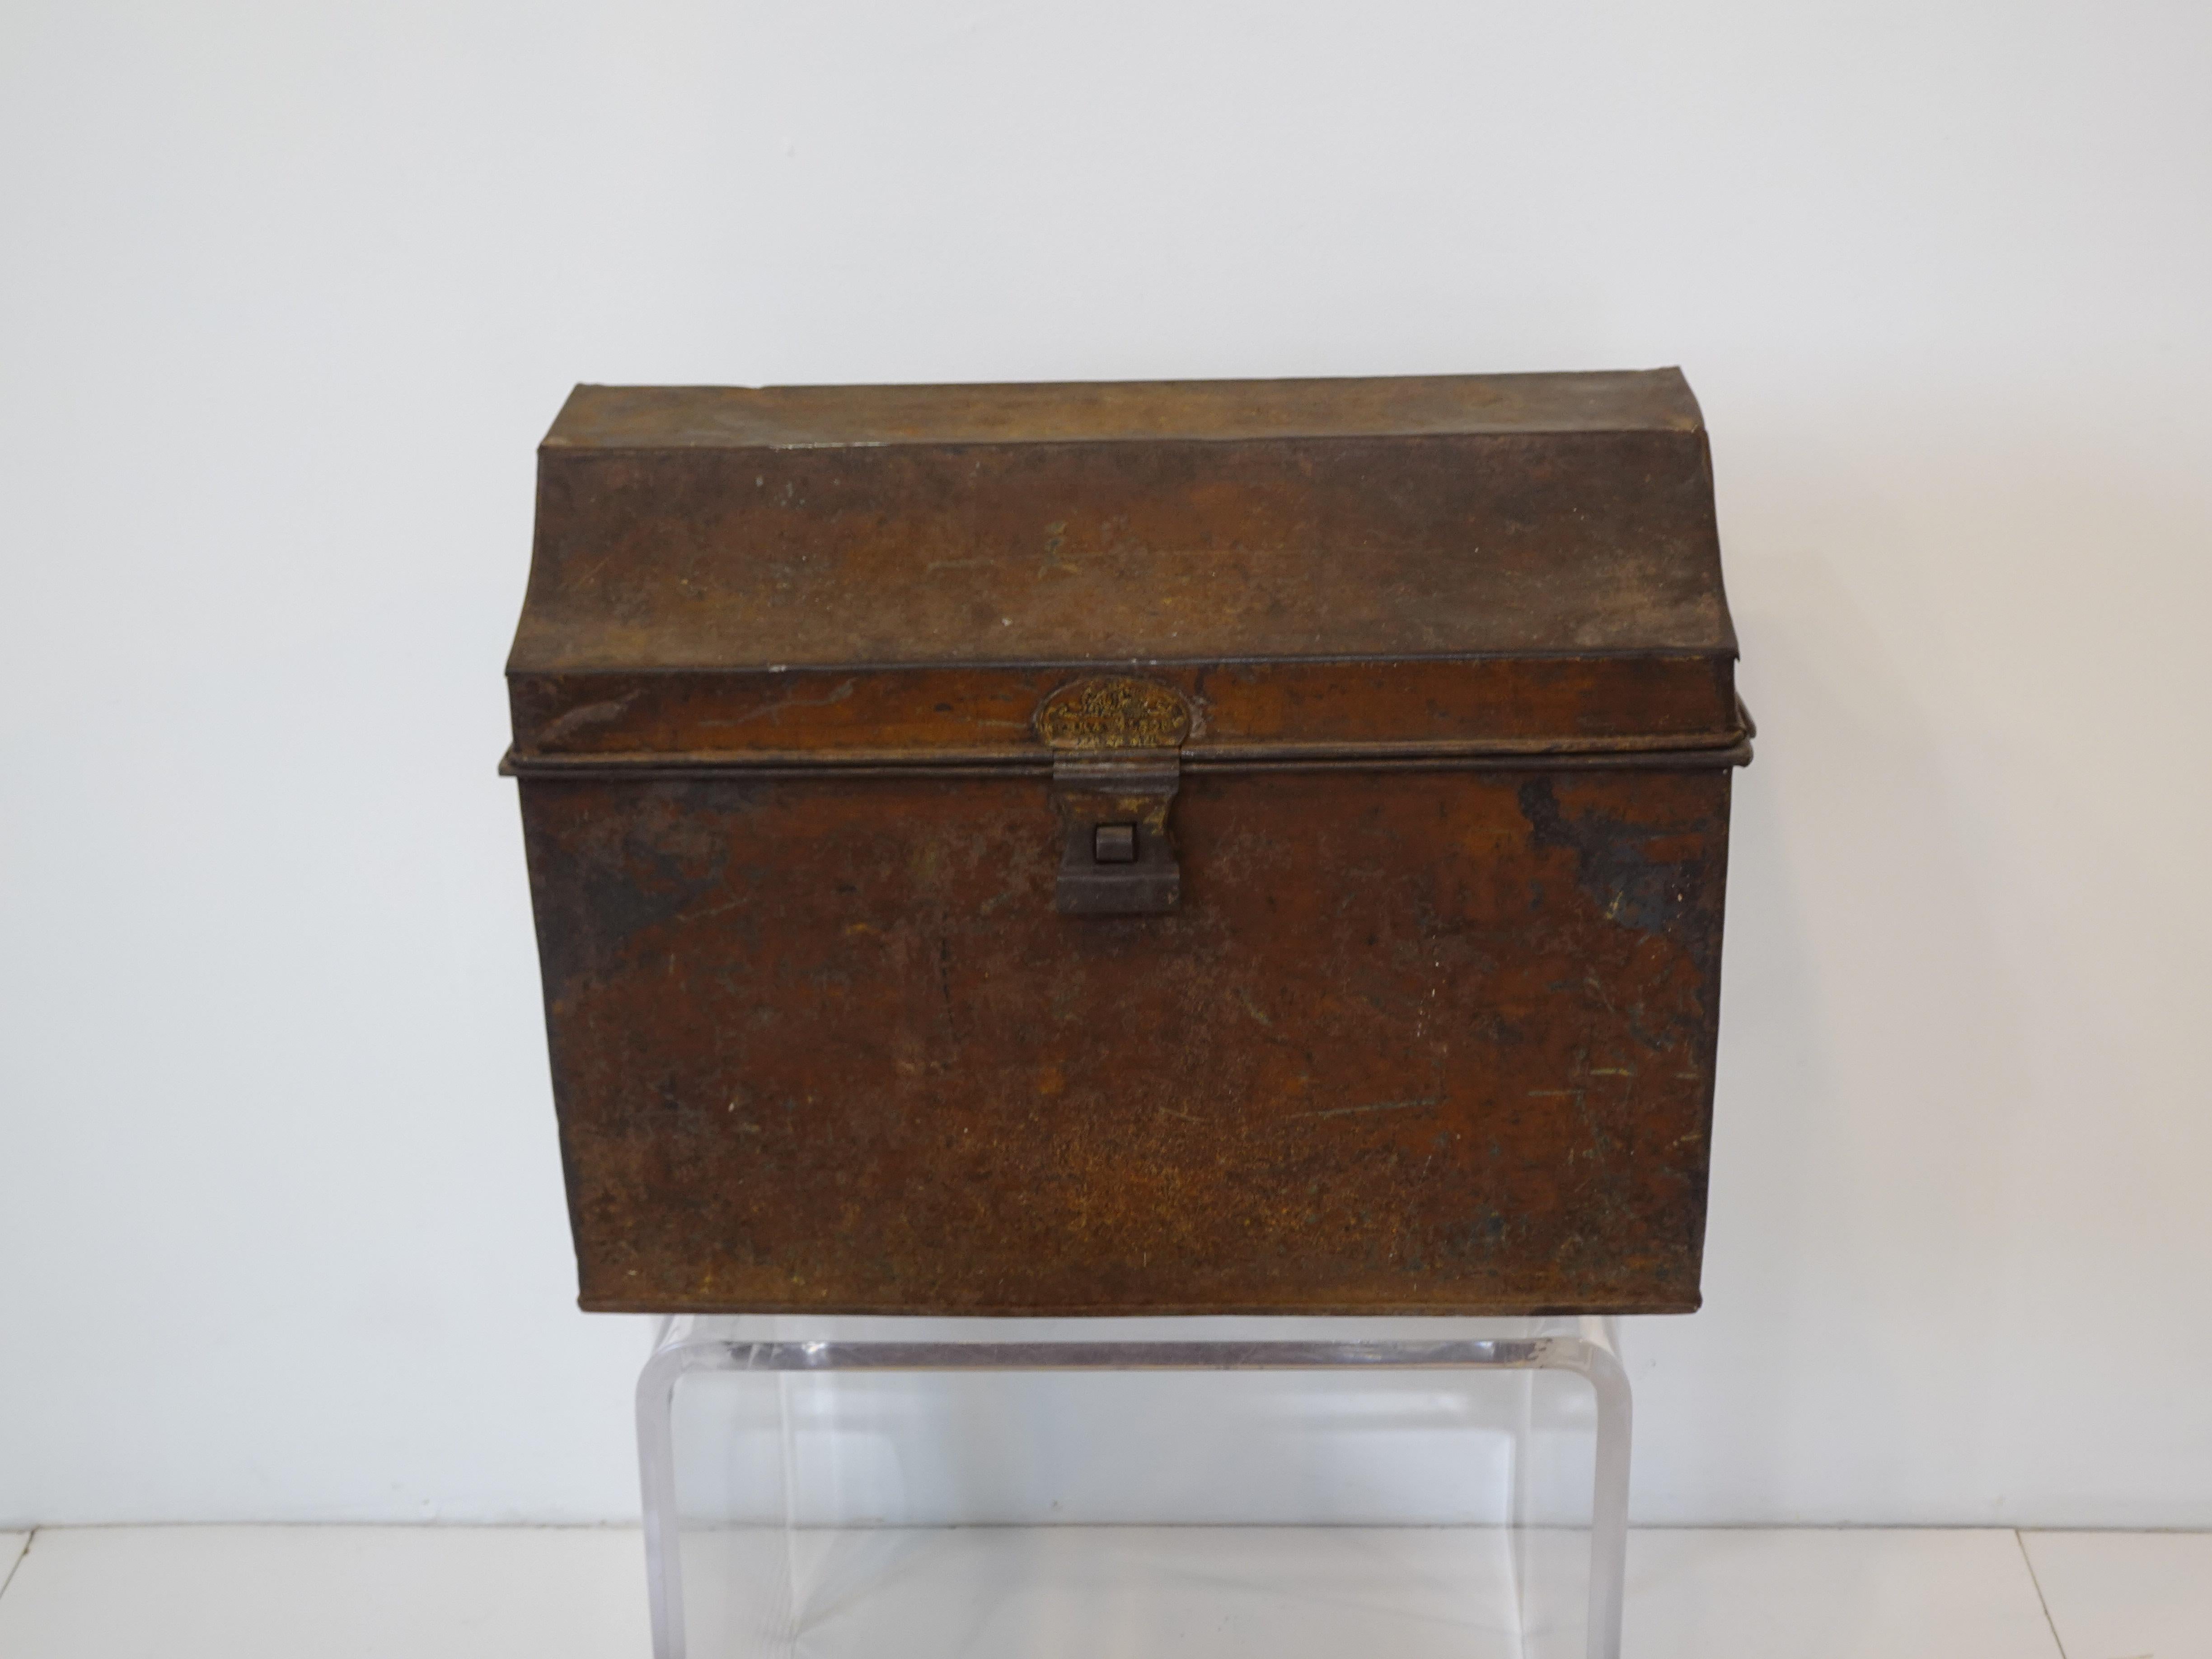 A small metal Royal mail box or trunk with sarcophagus styled design having a latch to the front and steel handles to each side. Above the latch is the embossed label for the manufacturer Kirk & Wilsons made in England, the outside has great aged